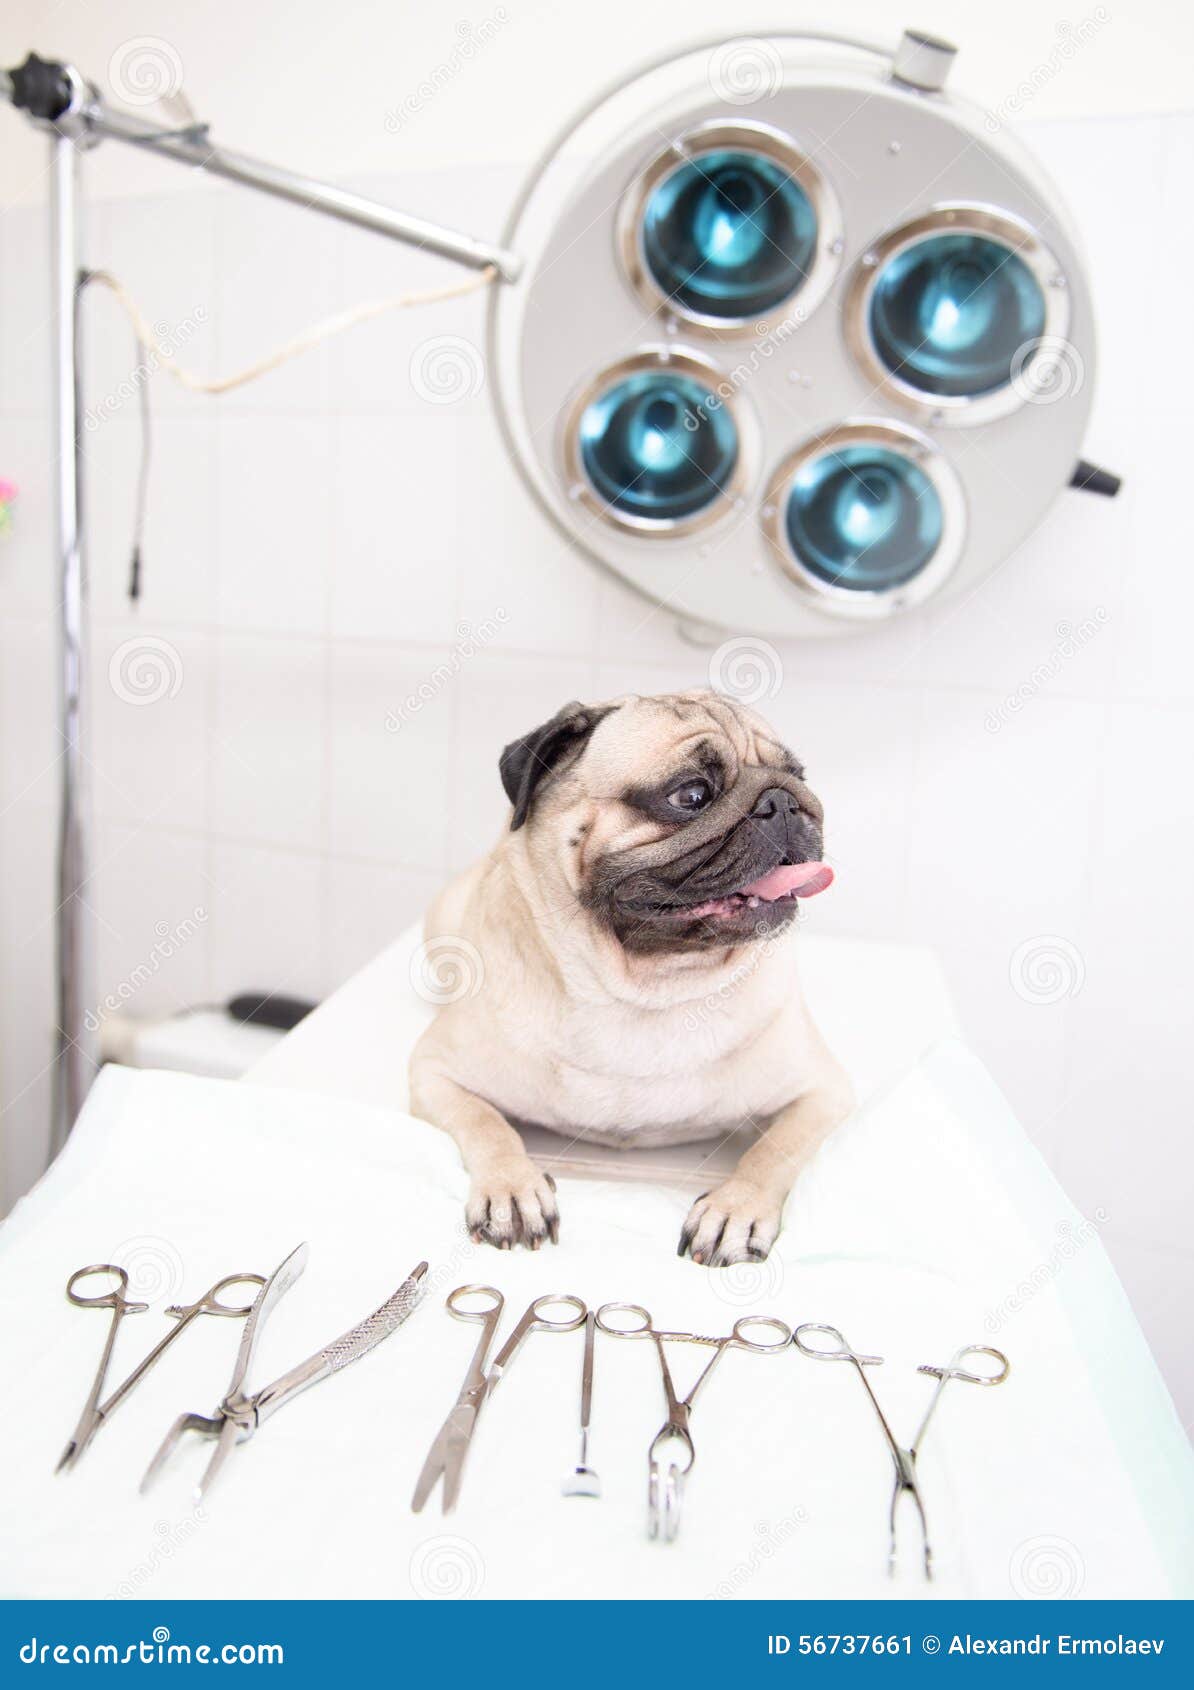 Dog in Veterinary Clinic Near Medical Tool Stock Image - Image of  equipment, office: 56737661